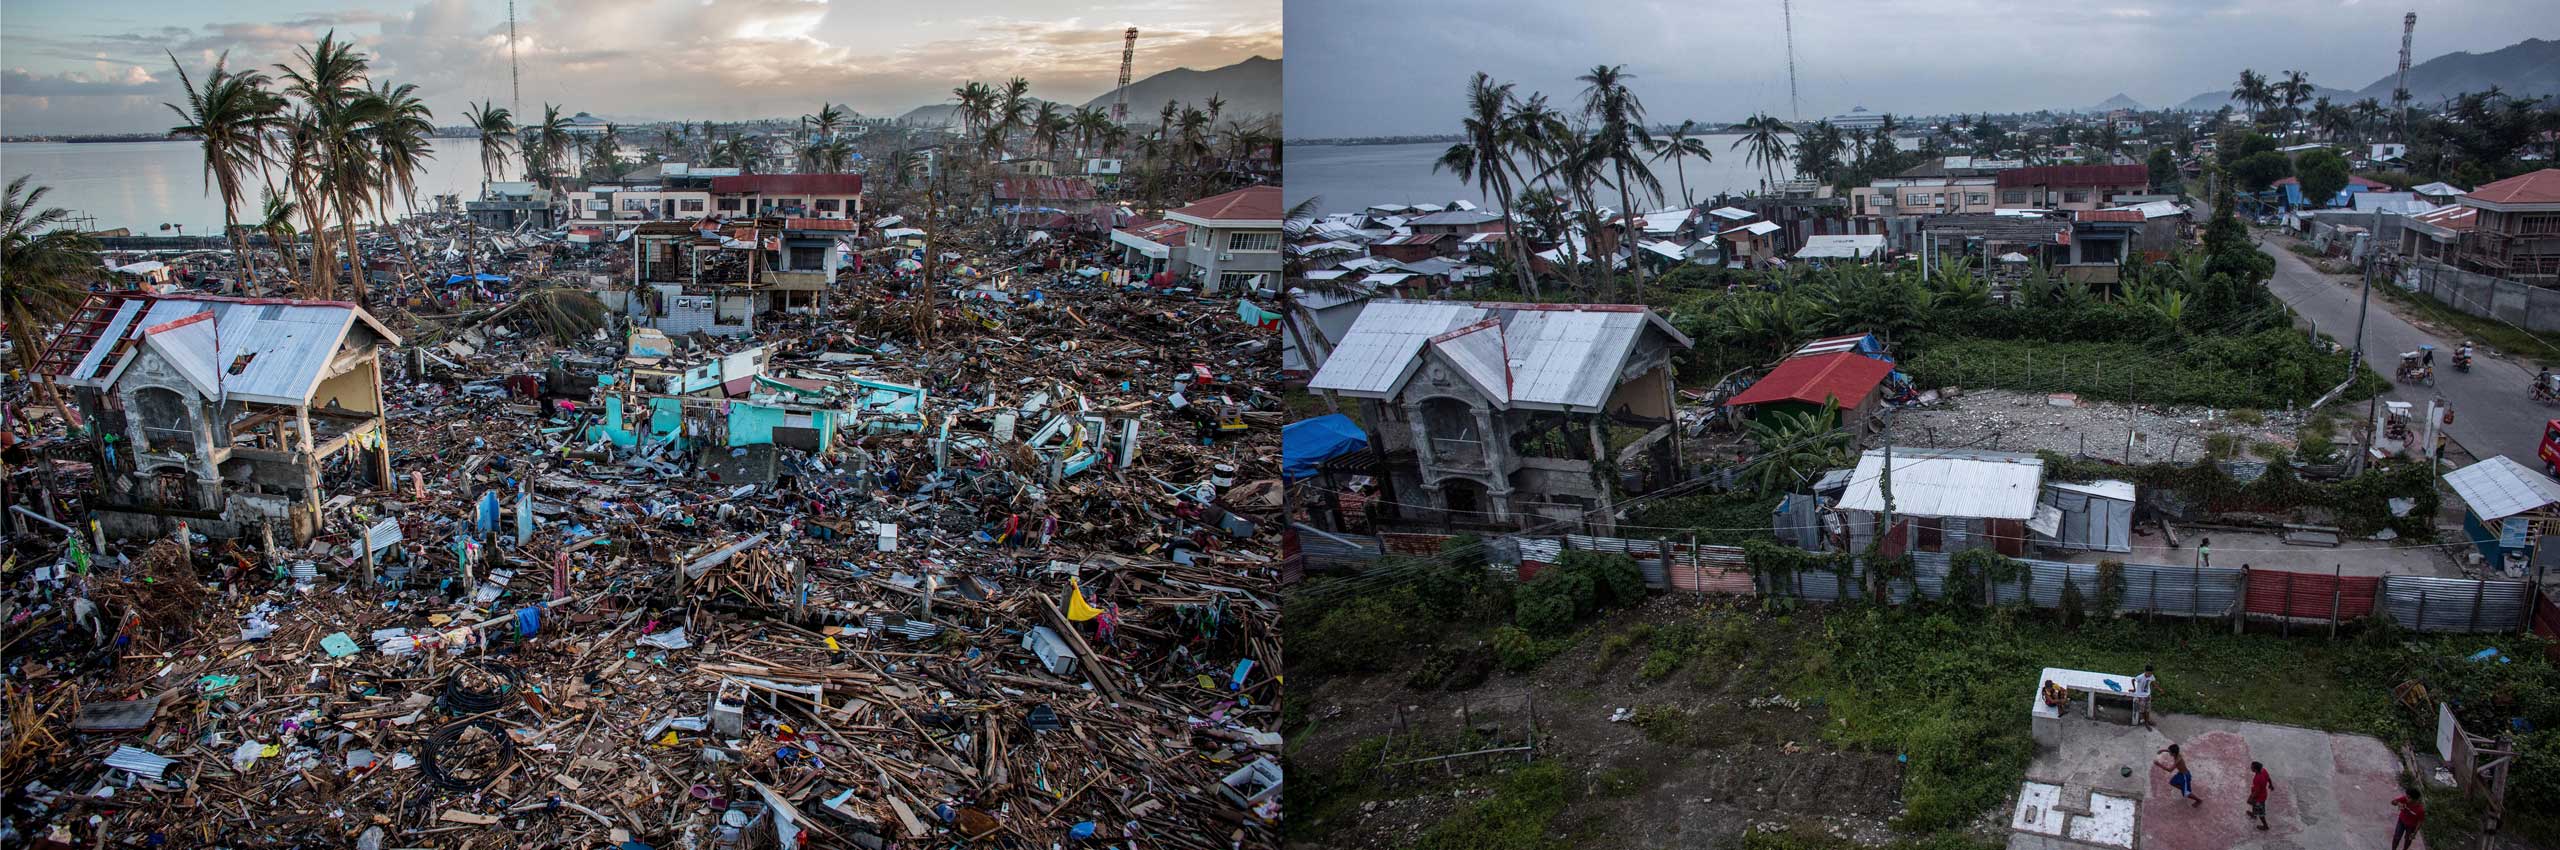 From the series: Supertyphoon Haiyan : See Photos of Tacloban Then and Now Before: A general view of the destroyed coastline in Tacloban City on Nov. 17, 2013 in Leyte, Philippines.After: View overlooking Magallanes district one year after Typhoon Haiyan on Nov. 4, 2014.